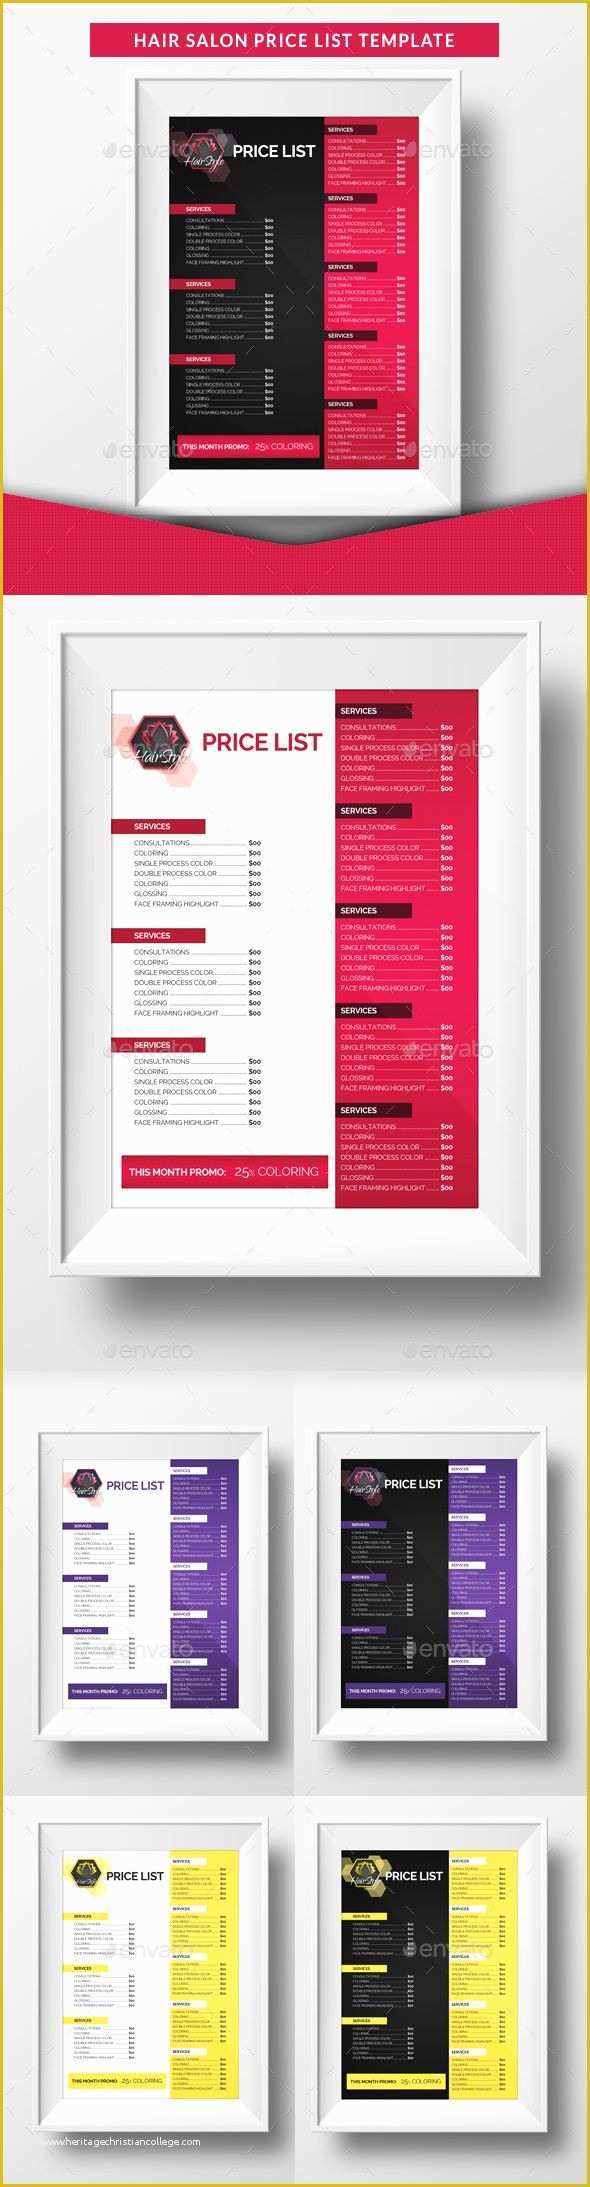 beauty-price-list-template-free-of-pin-by-bashooka-web-graphic-design-on-random-design